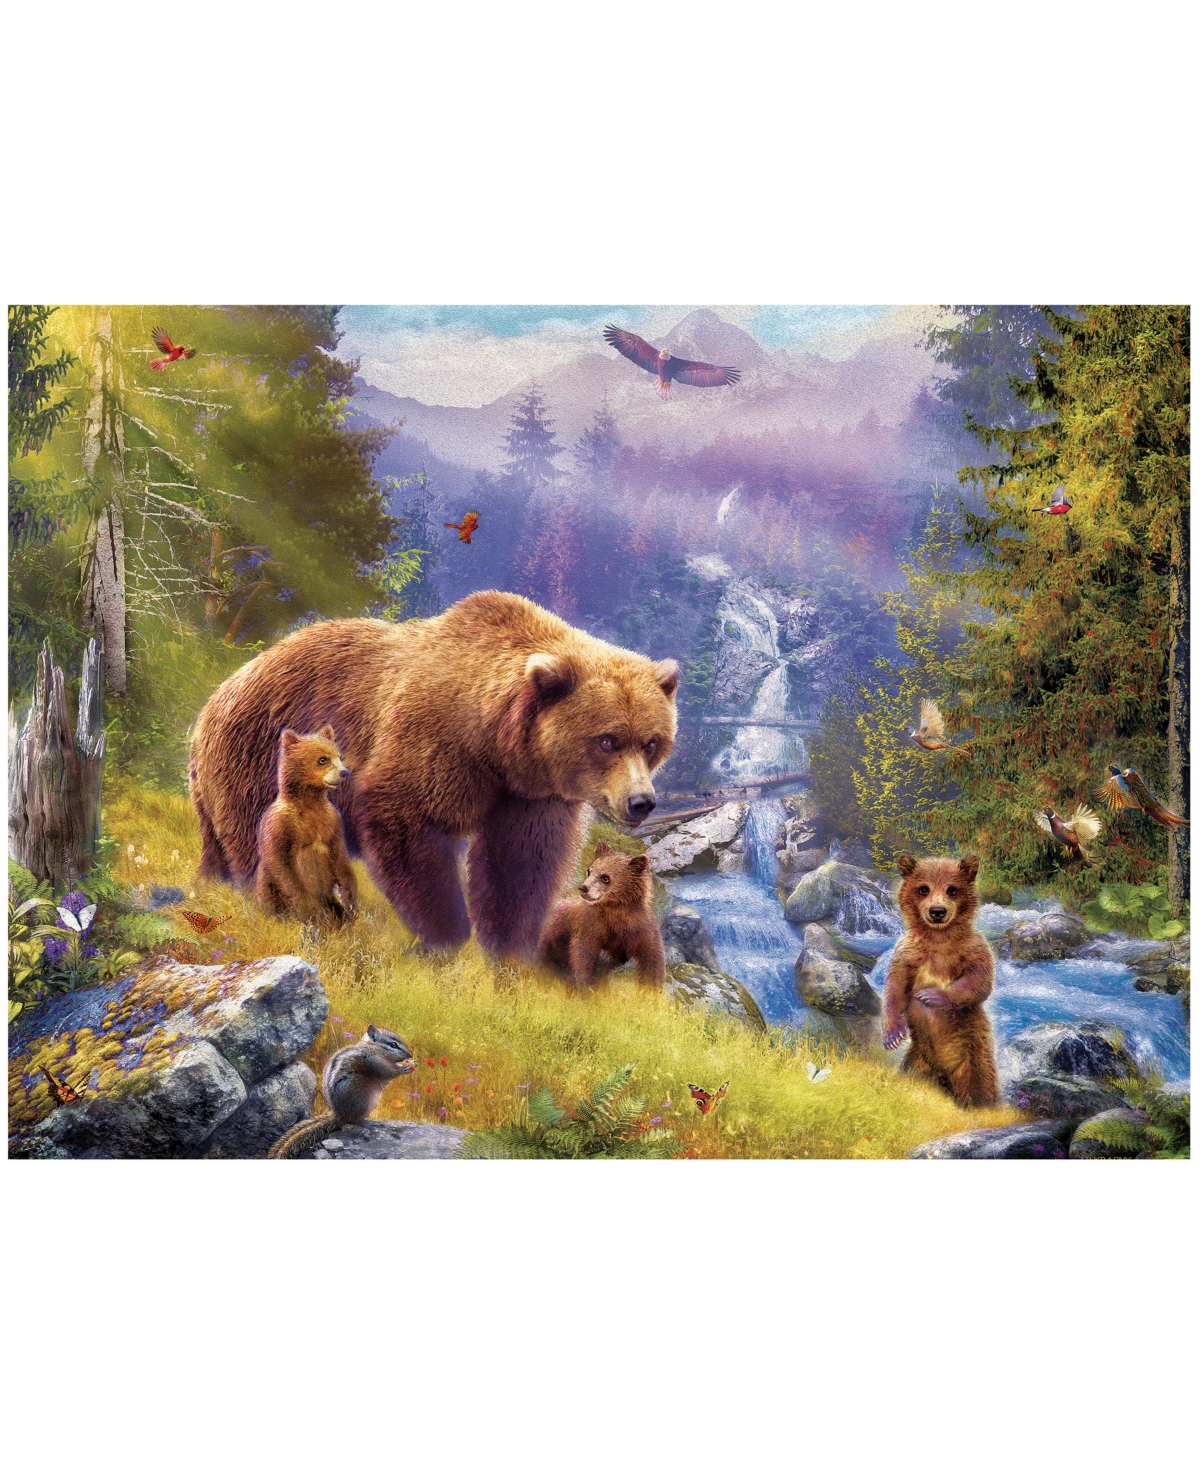 University Games Kids' Eurographics Incorporated Jan Patrik Grizzly Cubs Large Pieces Family Puzzle, 500 Pieces In No Color